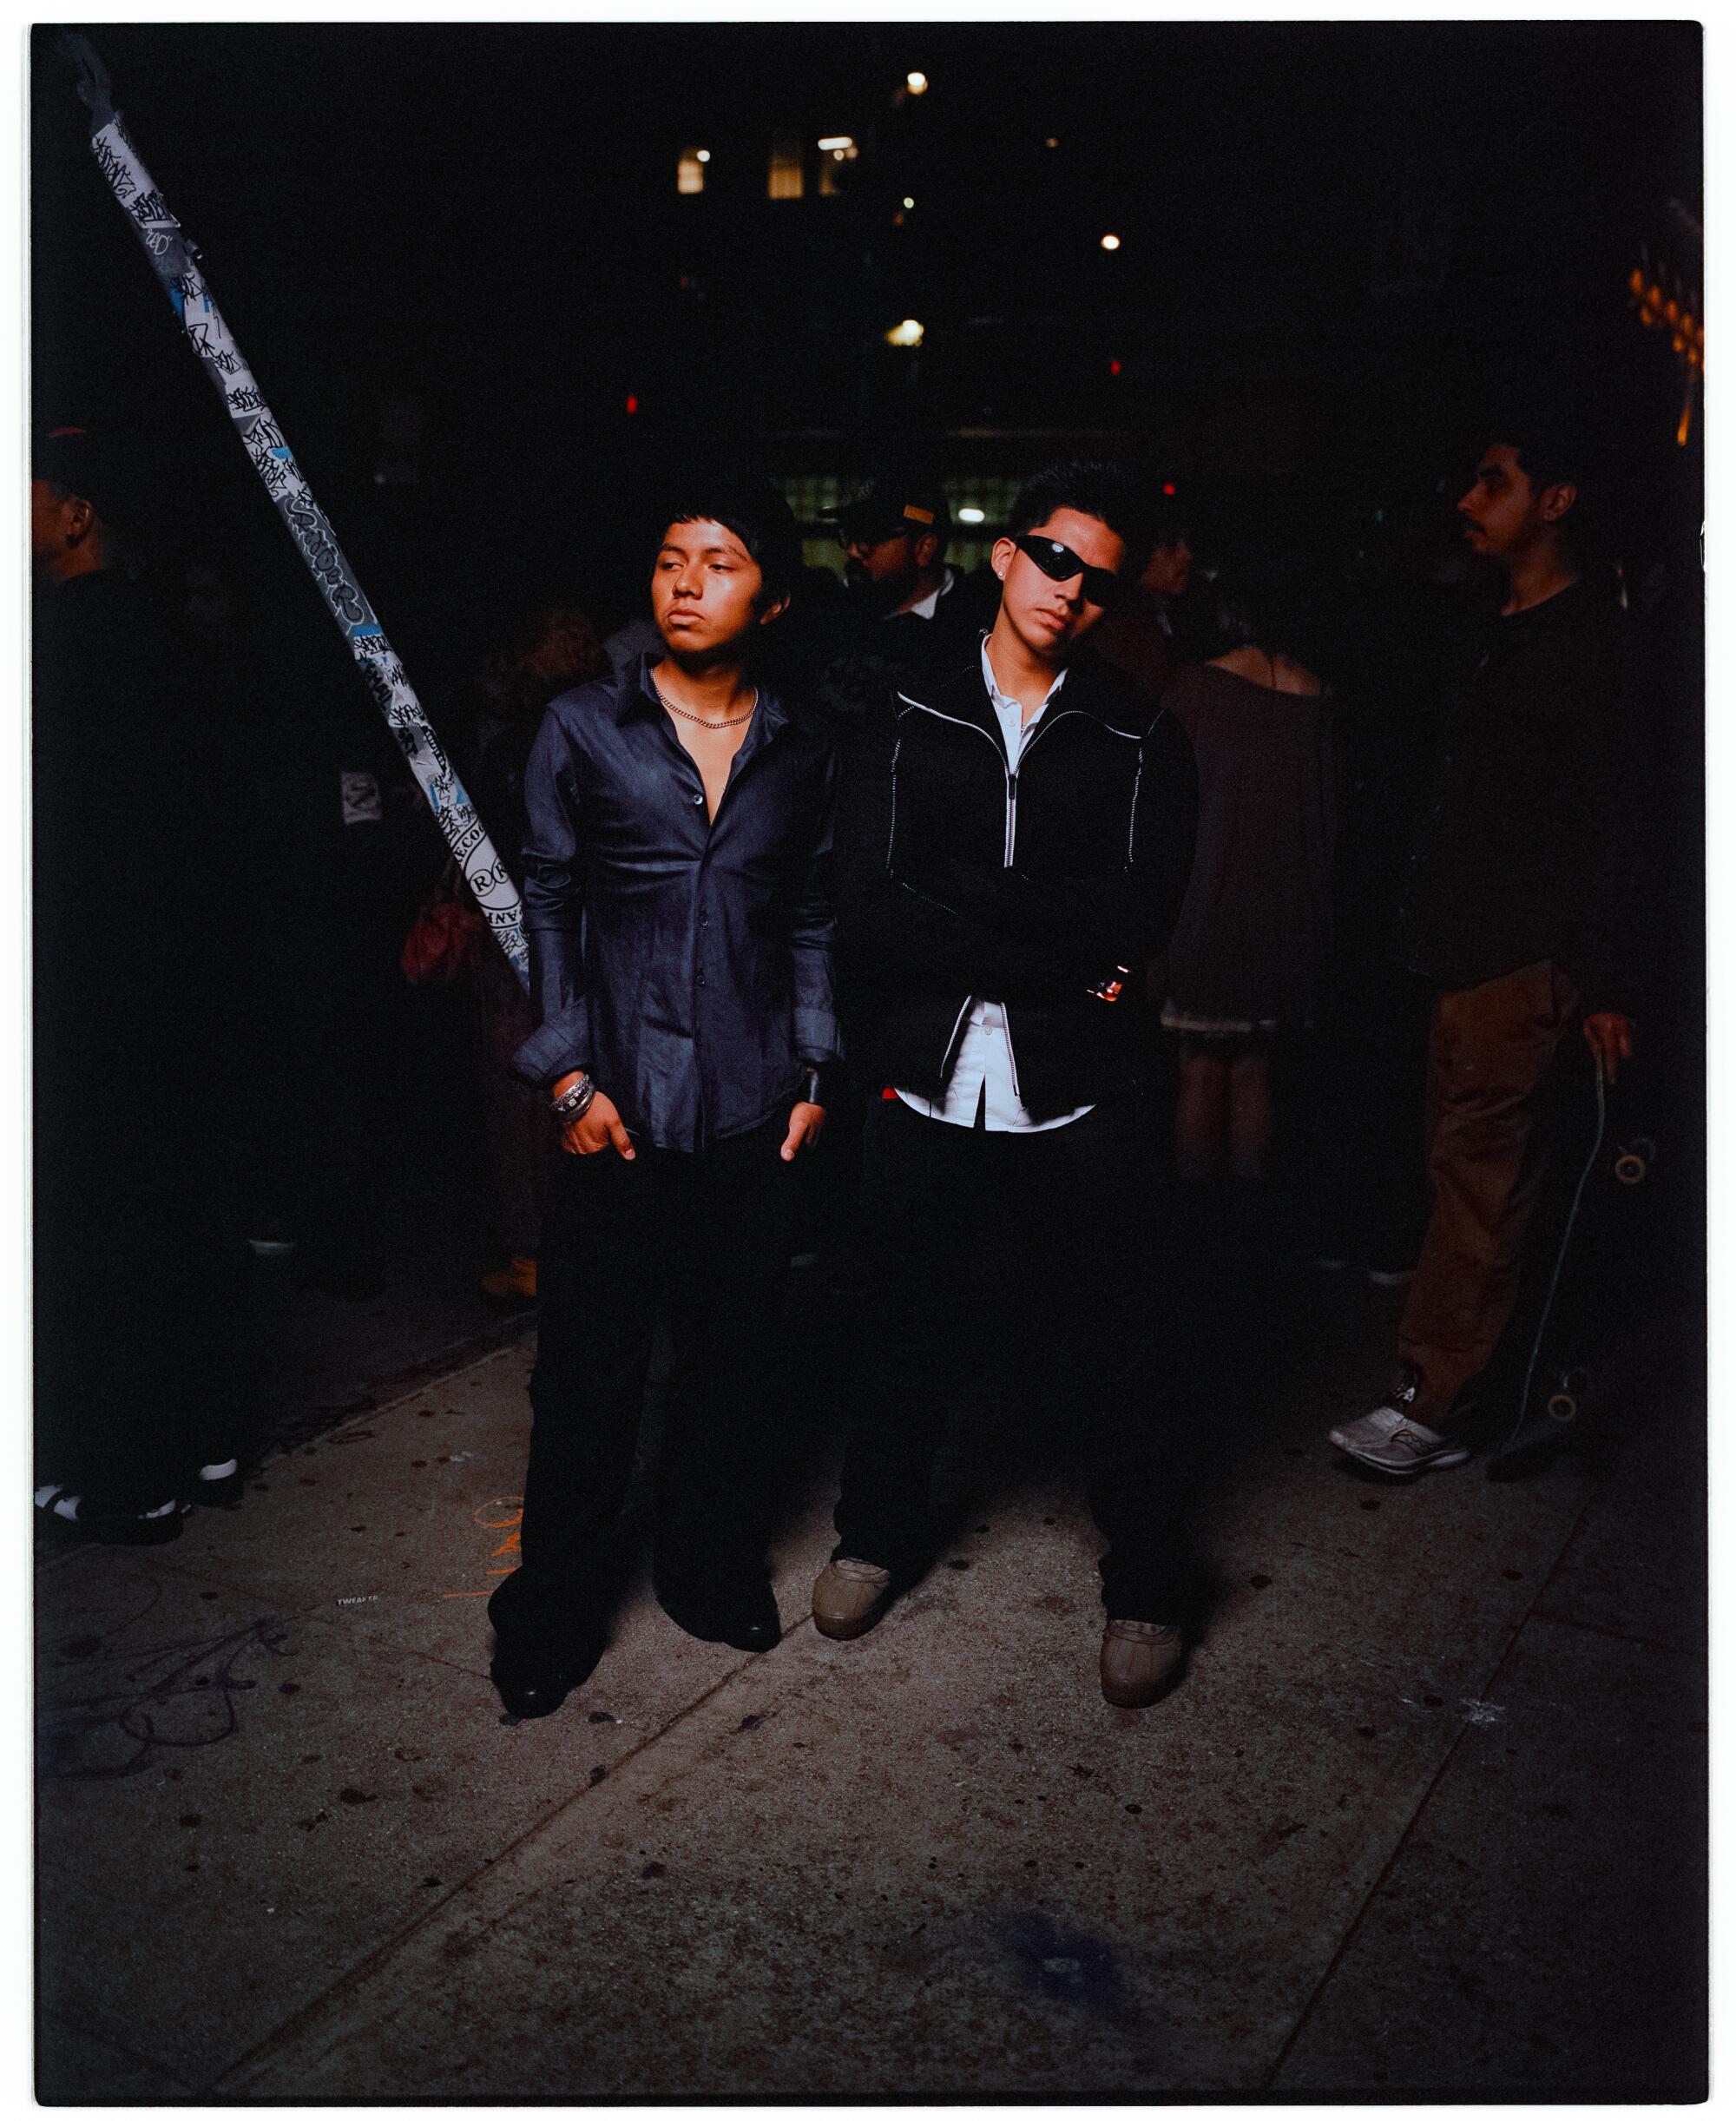 Two young men pose in all black outfits at night.